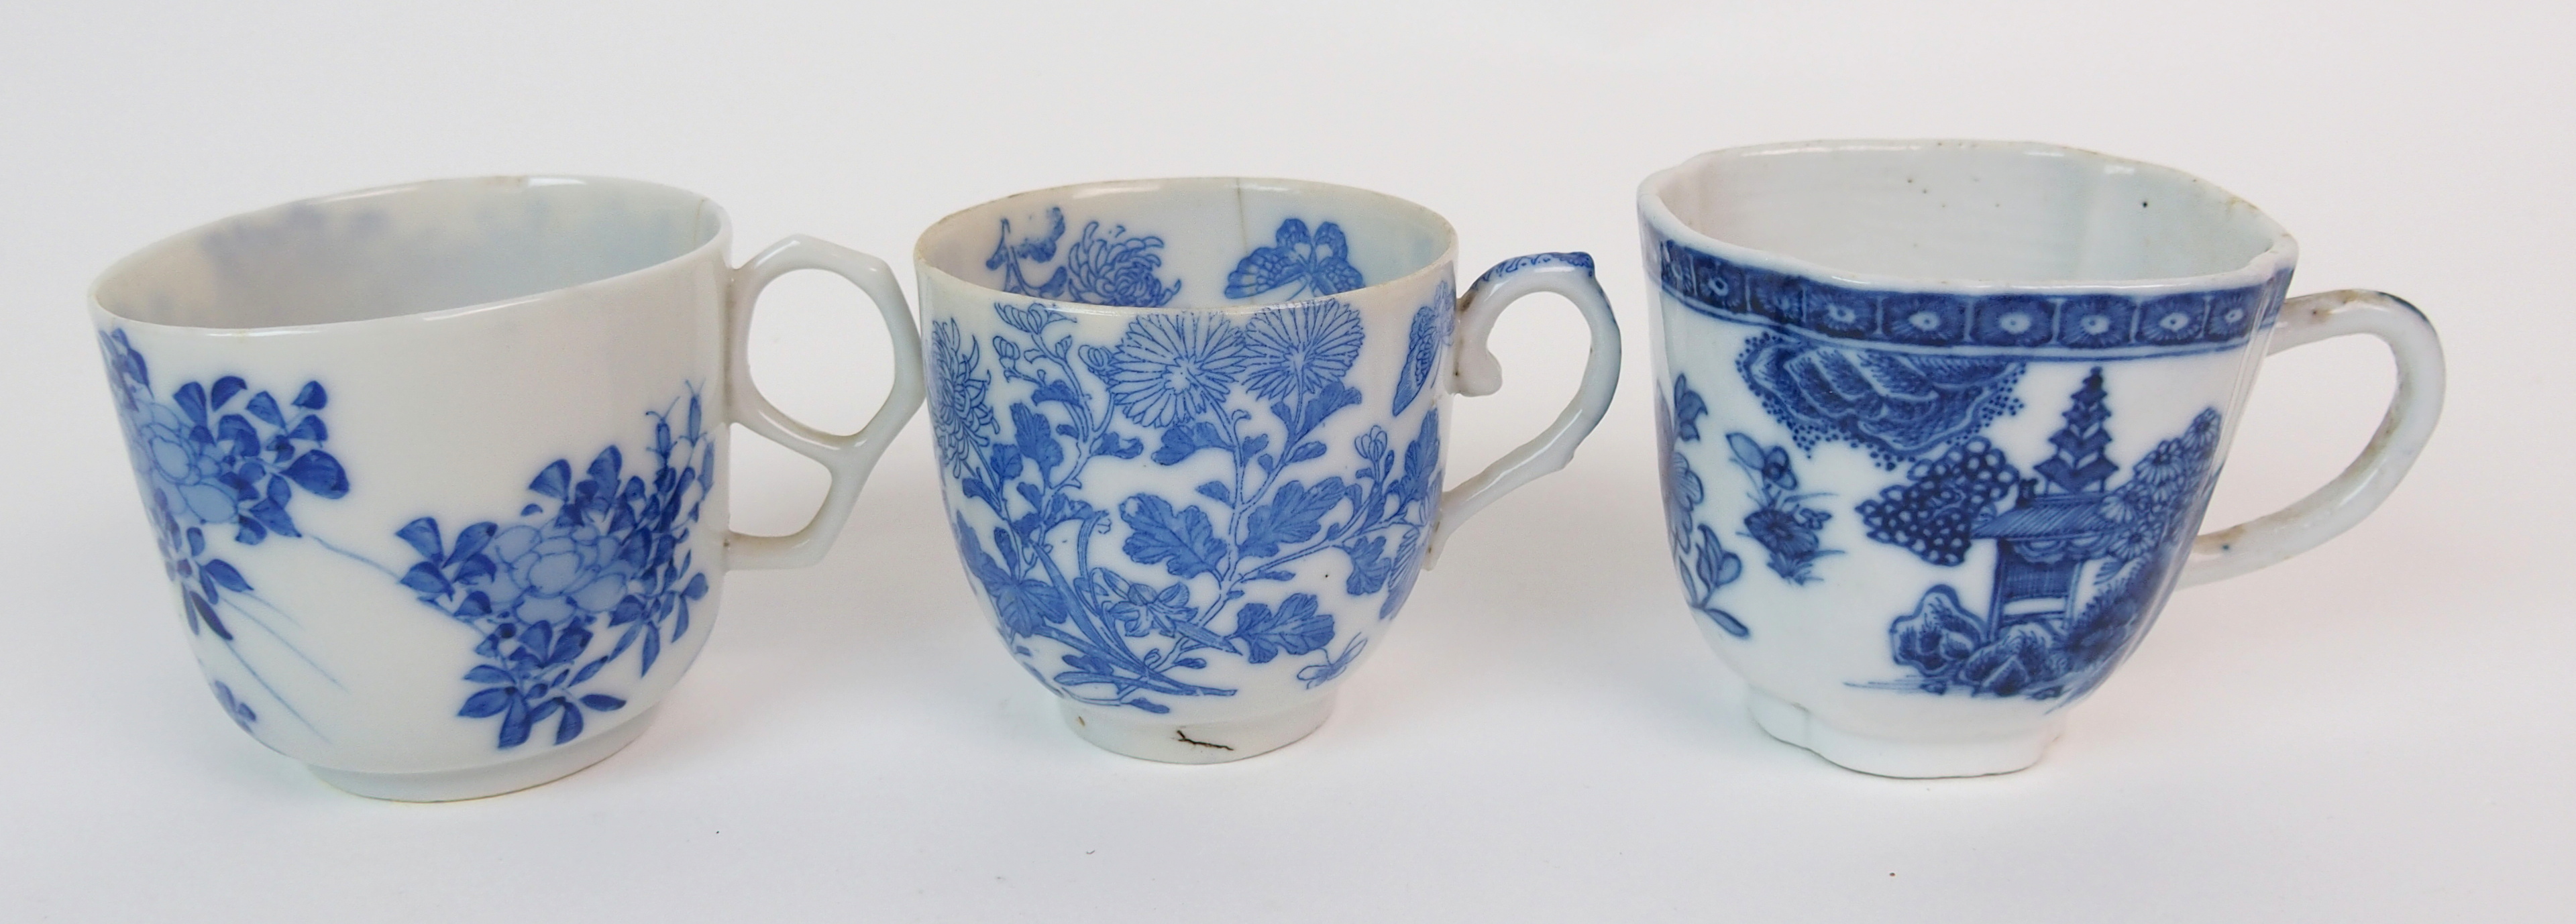 A group of twenty-three Chinese export teacups painted with typical landscapes and gilt rims, - Image 3 of 10